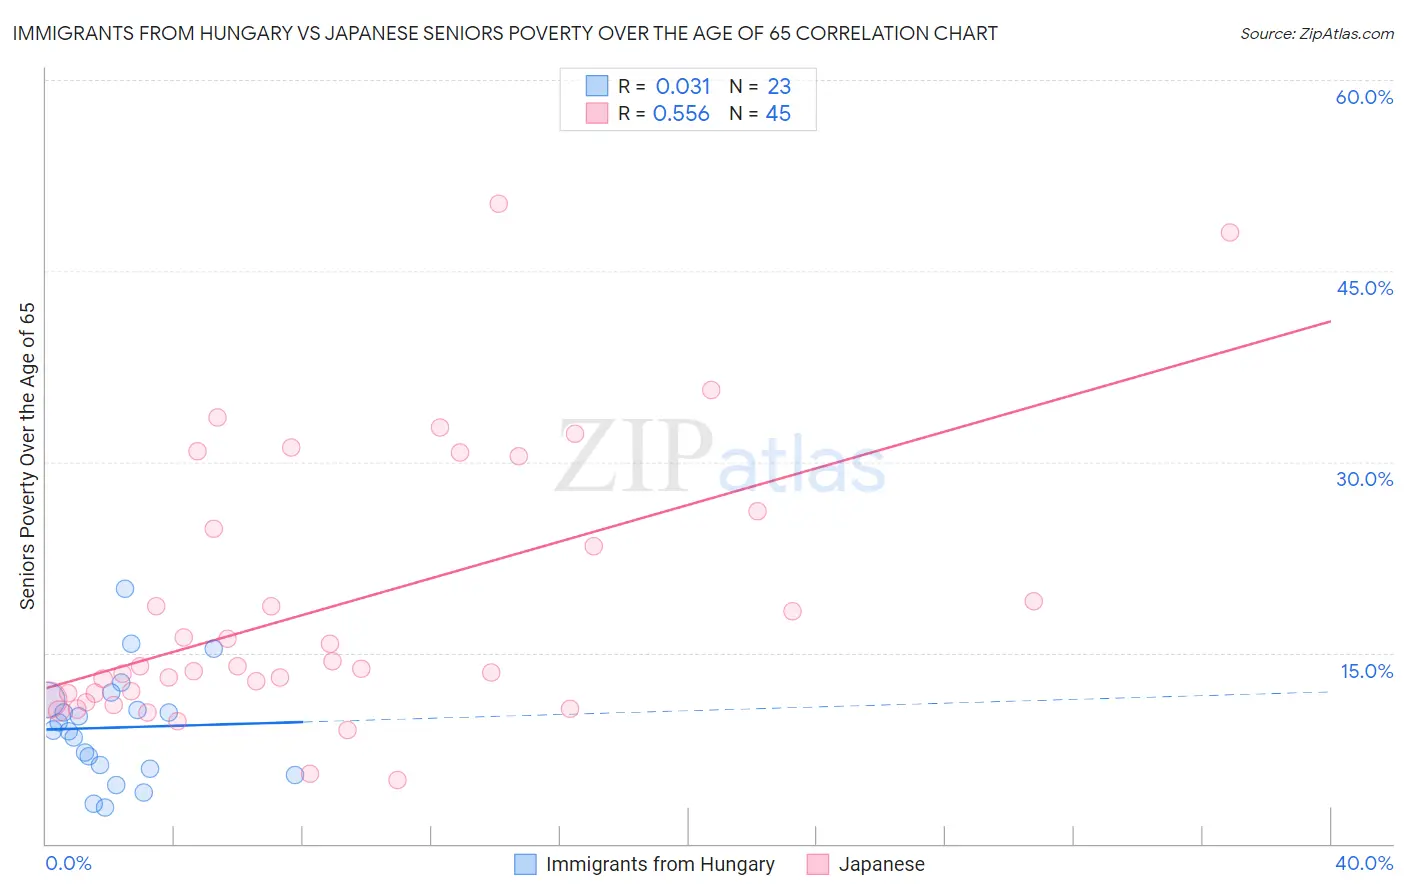 Immigrants from Hungary vs Japanese Seniors Poverty Over the Age of 65